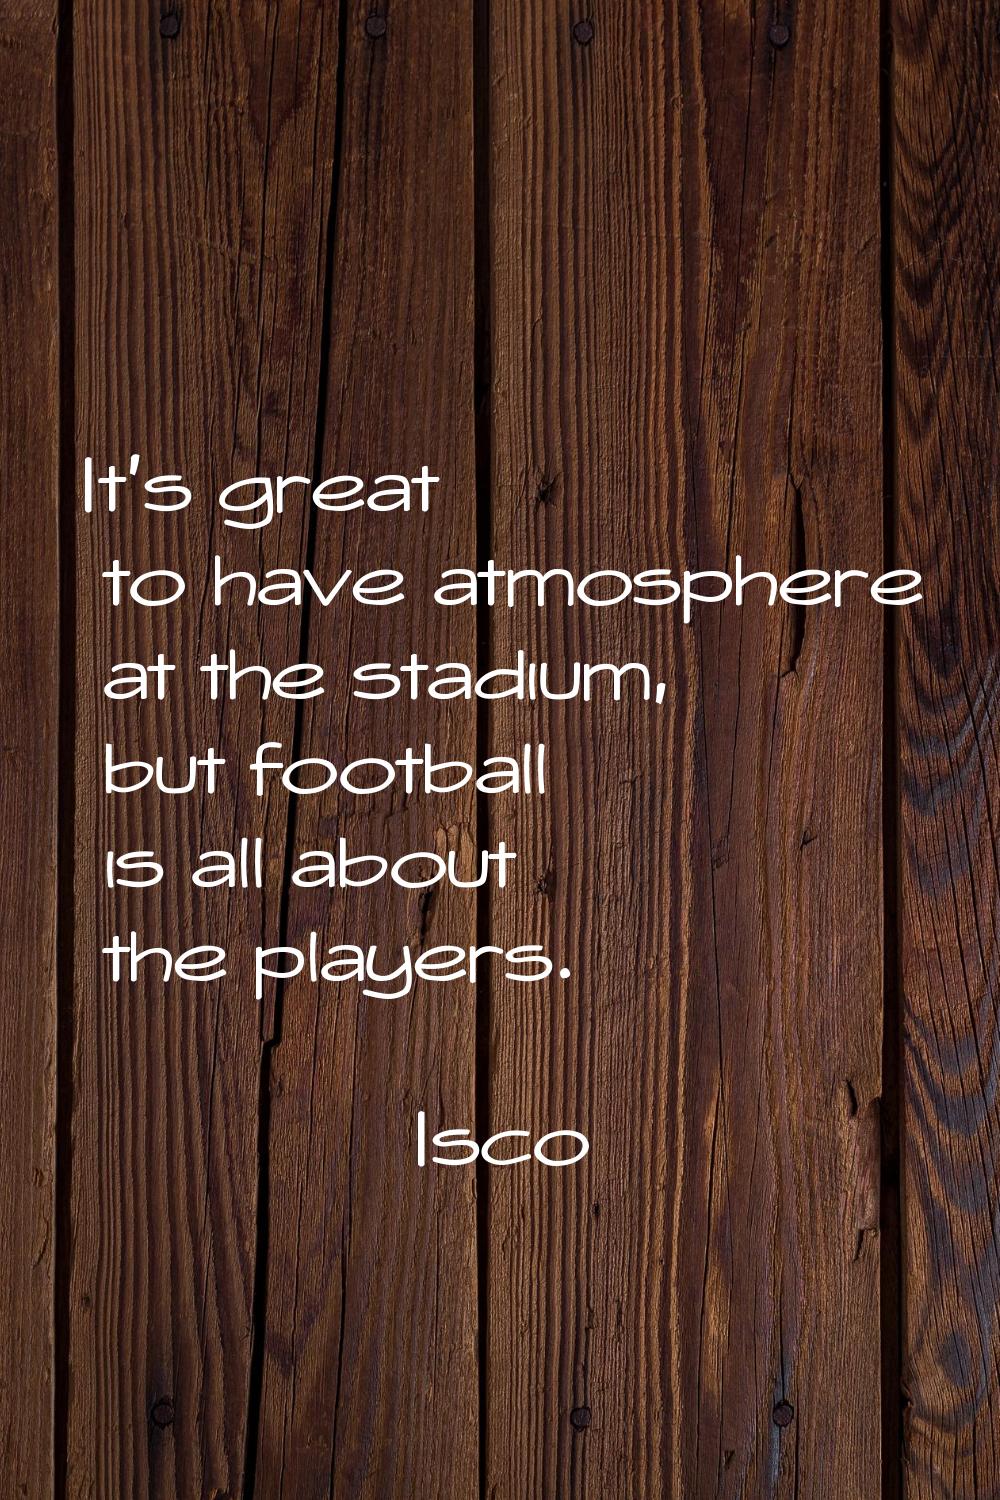 It's great to have atmosphere at the stadium, but football is all about the players.